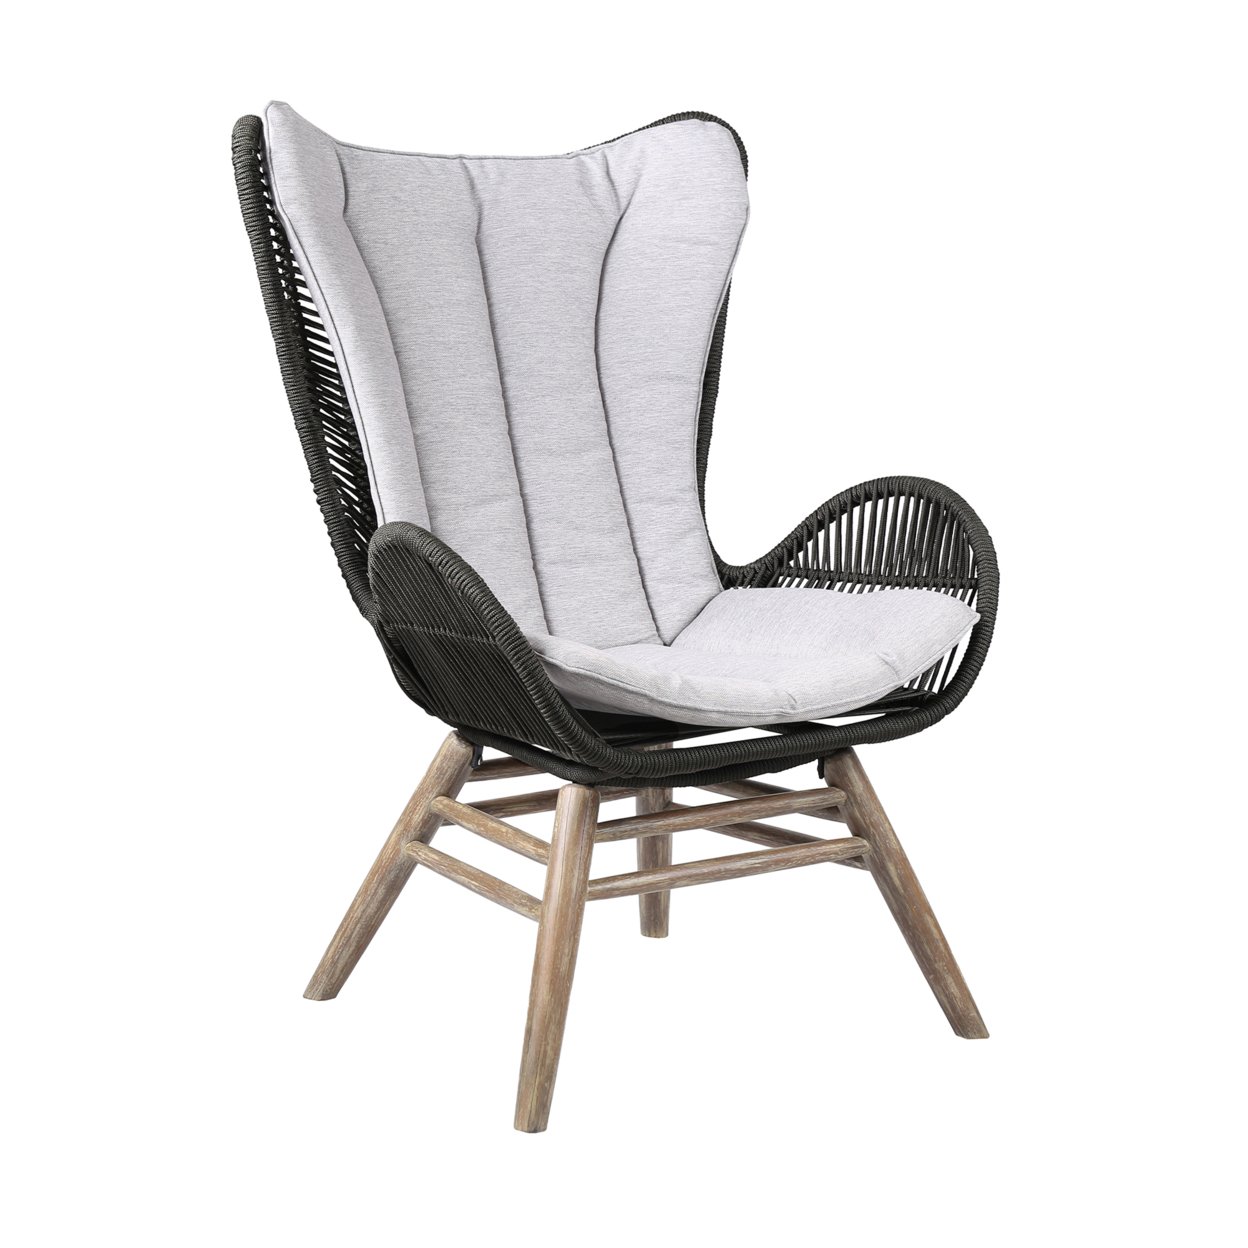 Indoor Outdoor Lounge Chair With Intricate Rope Woven Wingback, Gray- Saltoro Sherpi